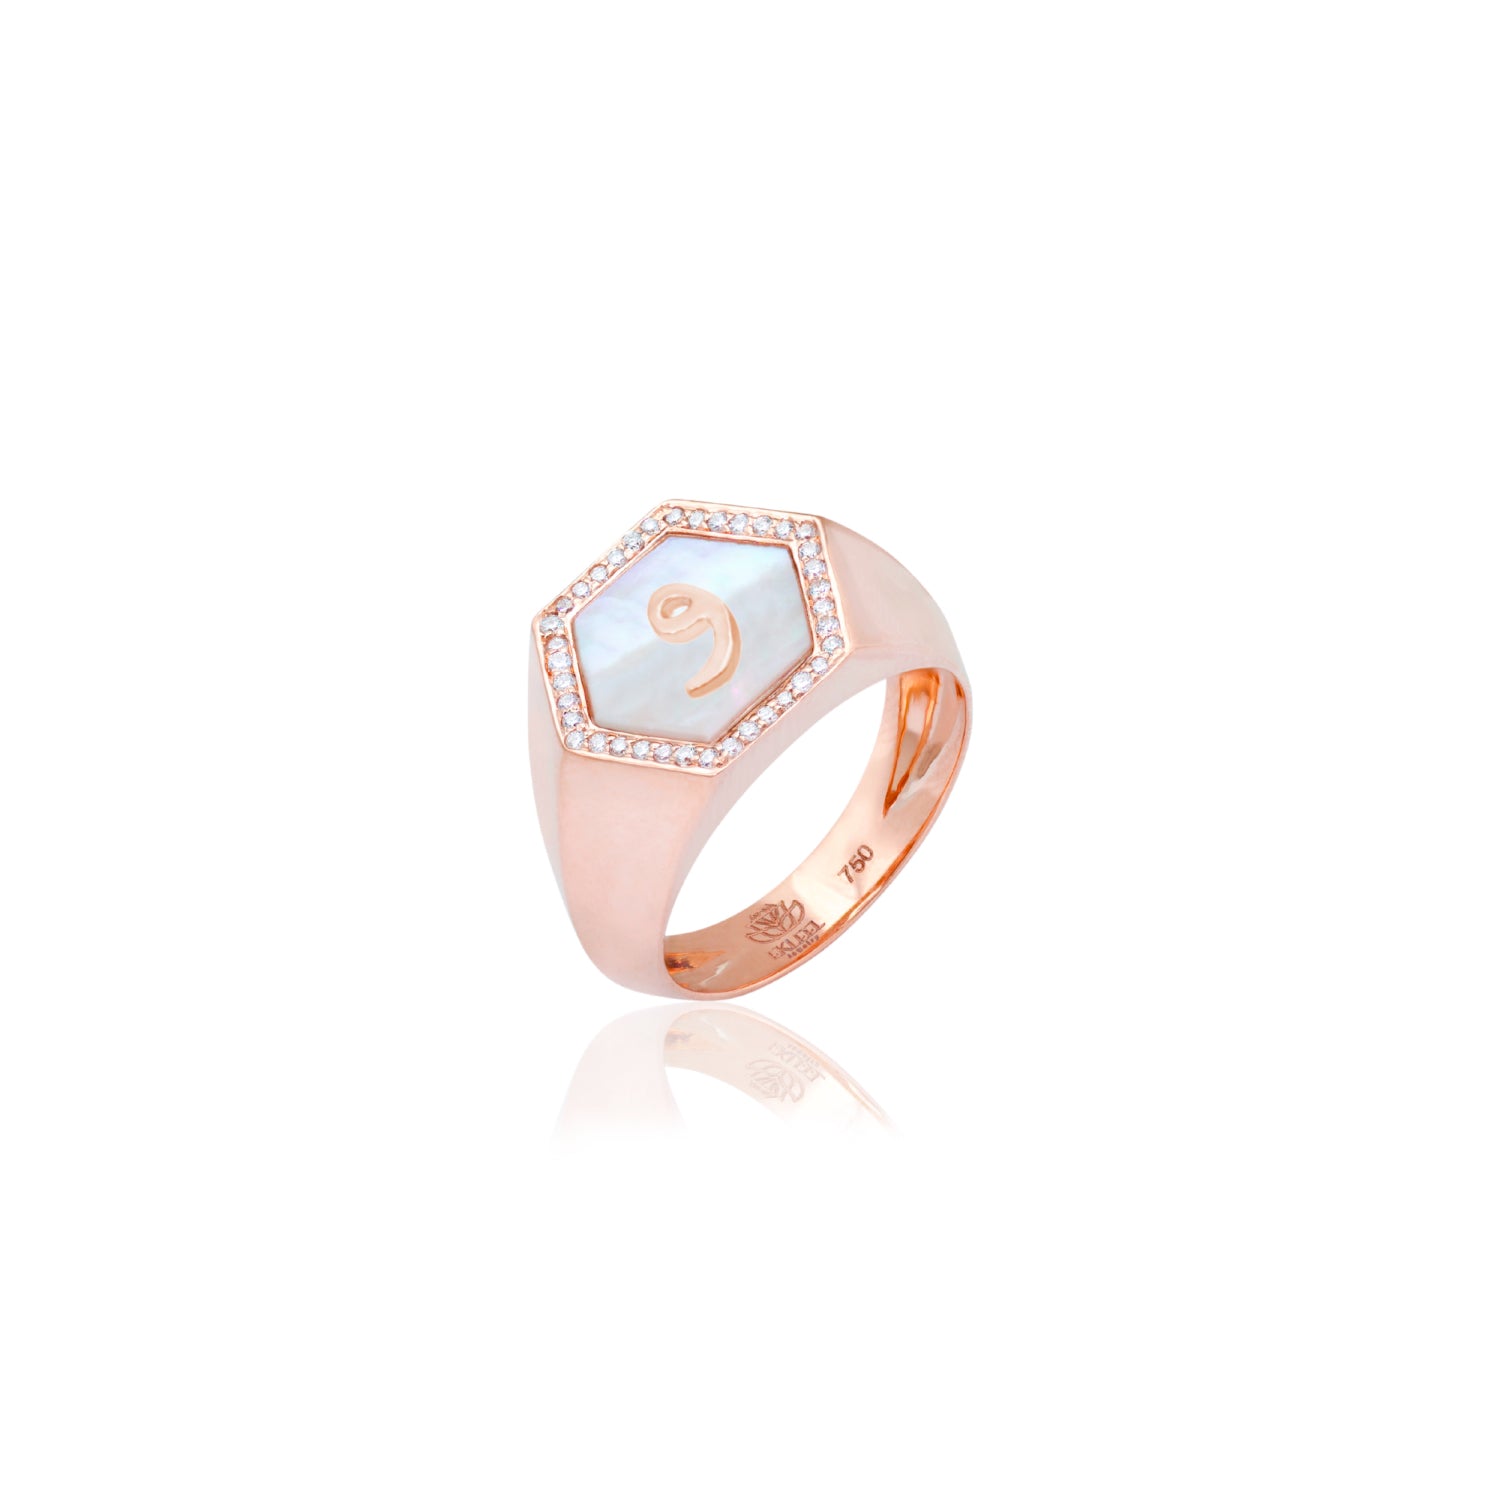 Qamoos 2.0 Letter و White Mother of Pearl and Diamond Signet Ring in Rose Gold